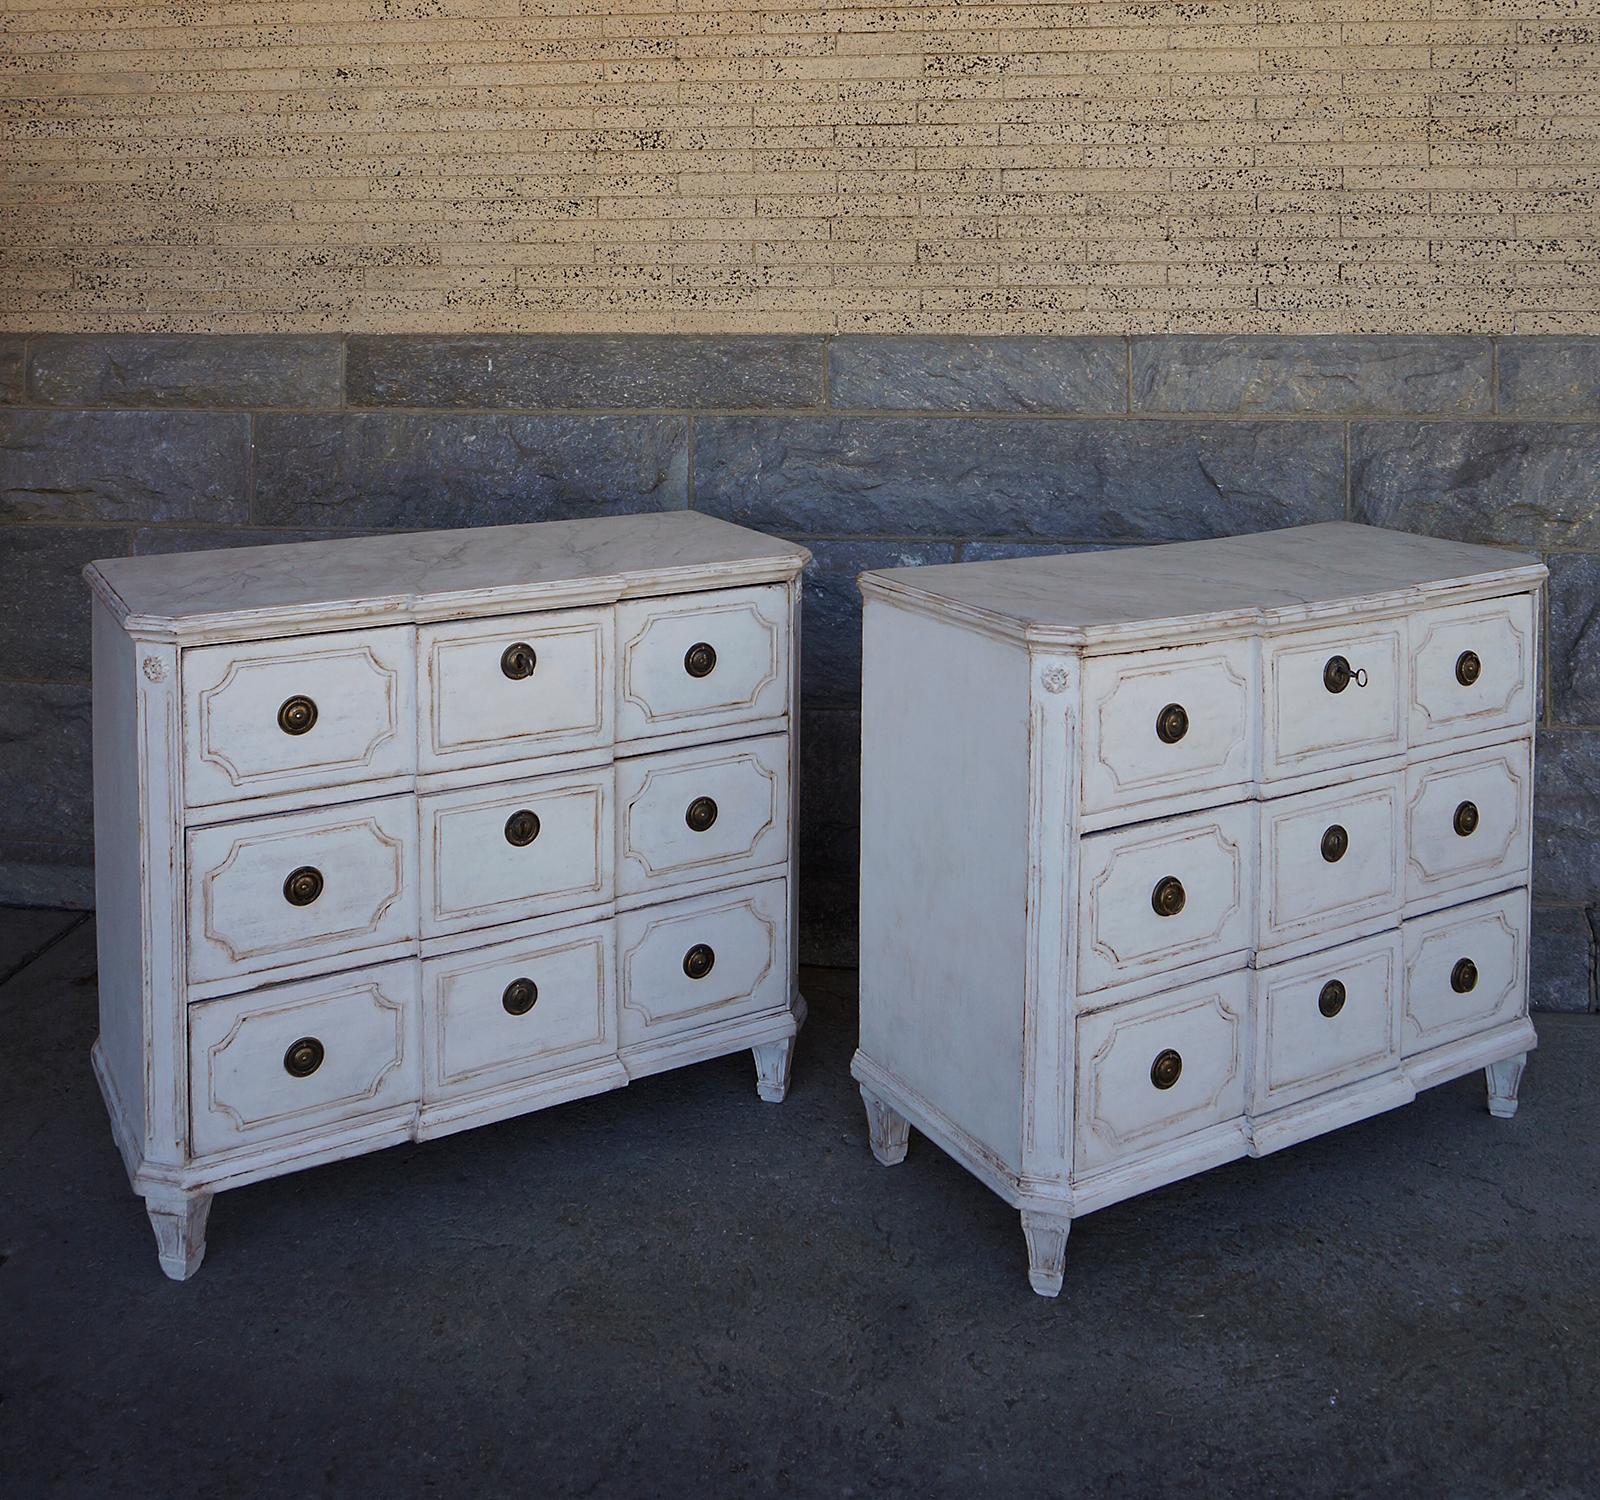 Pair of three drawer chests, Sweden, circa 1860, with shaped tops, and drawers with incised detail. The canted corners have applied rosettes and vertical fluting. Original brass hardware. The feet have been replaced.